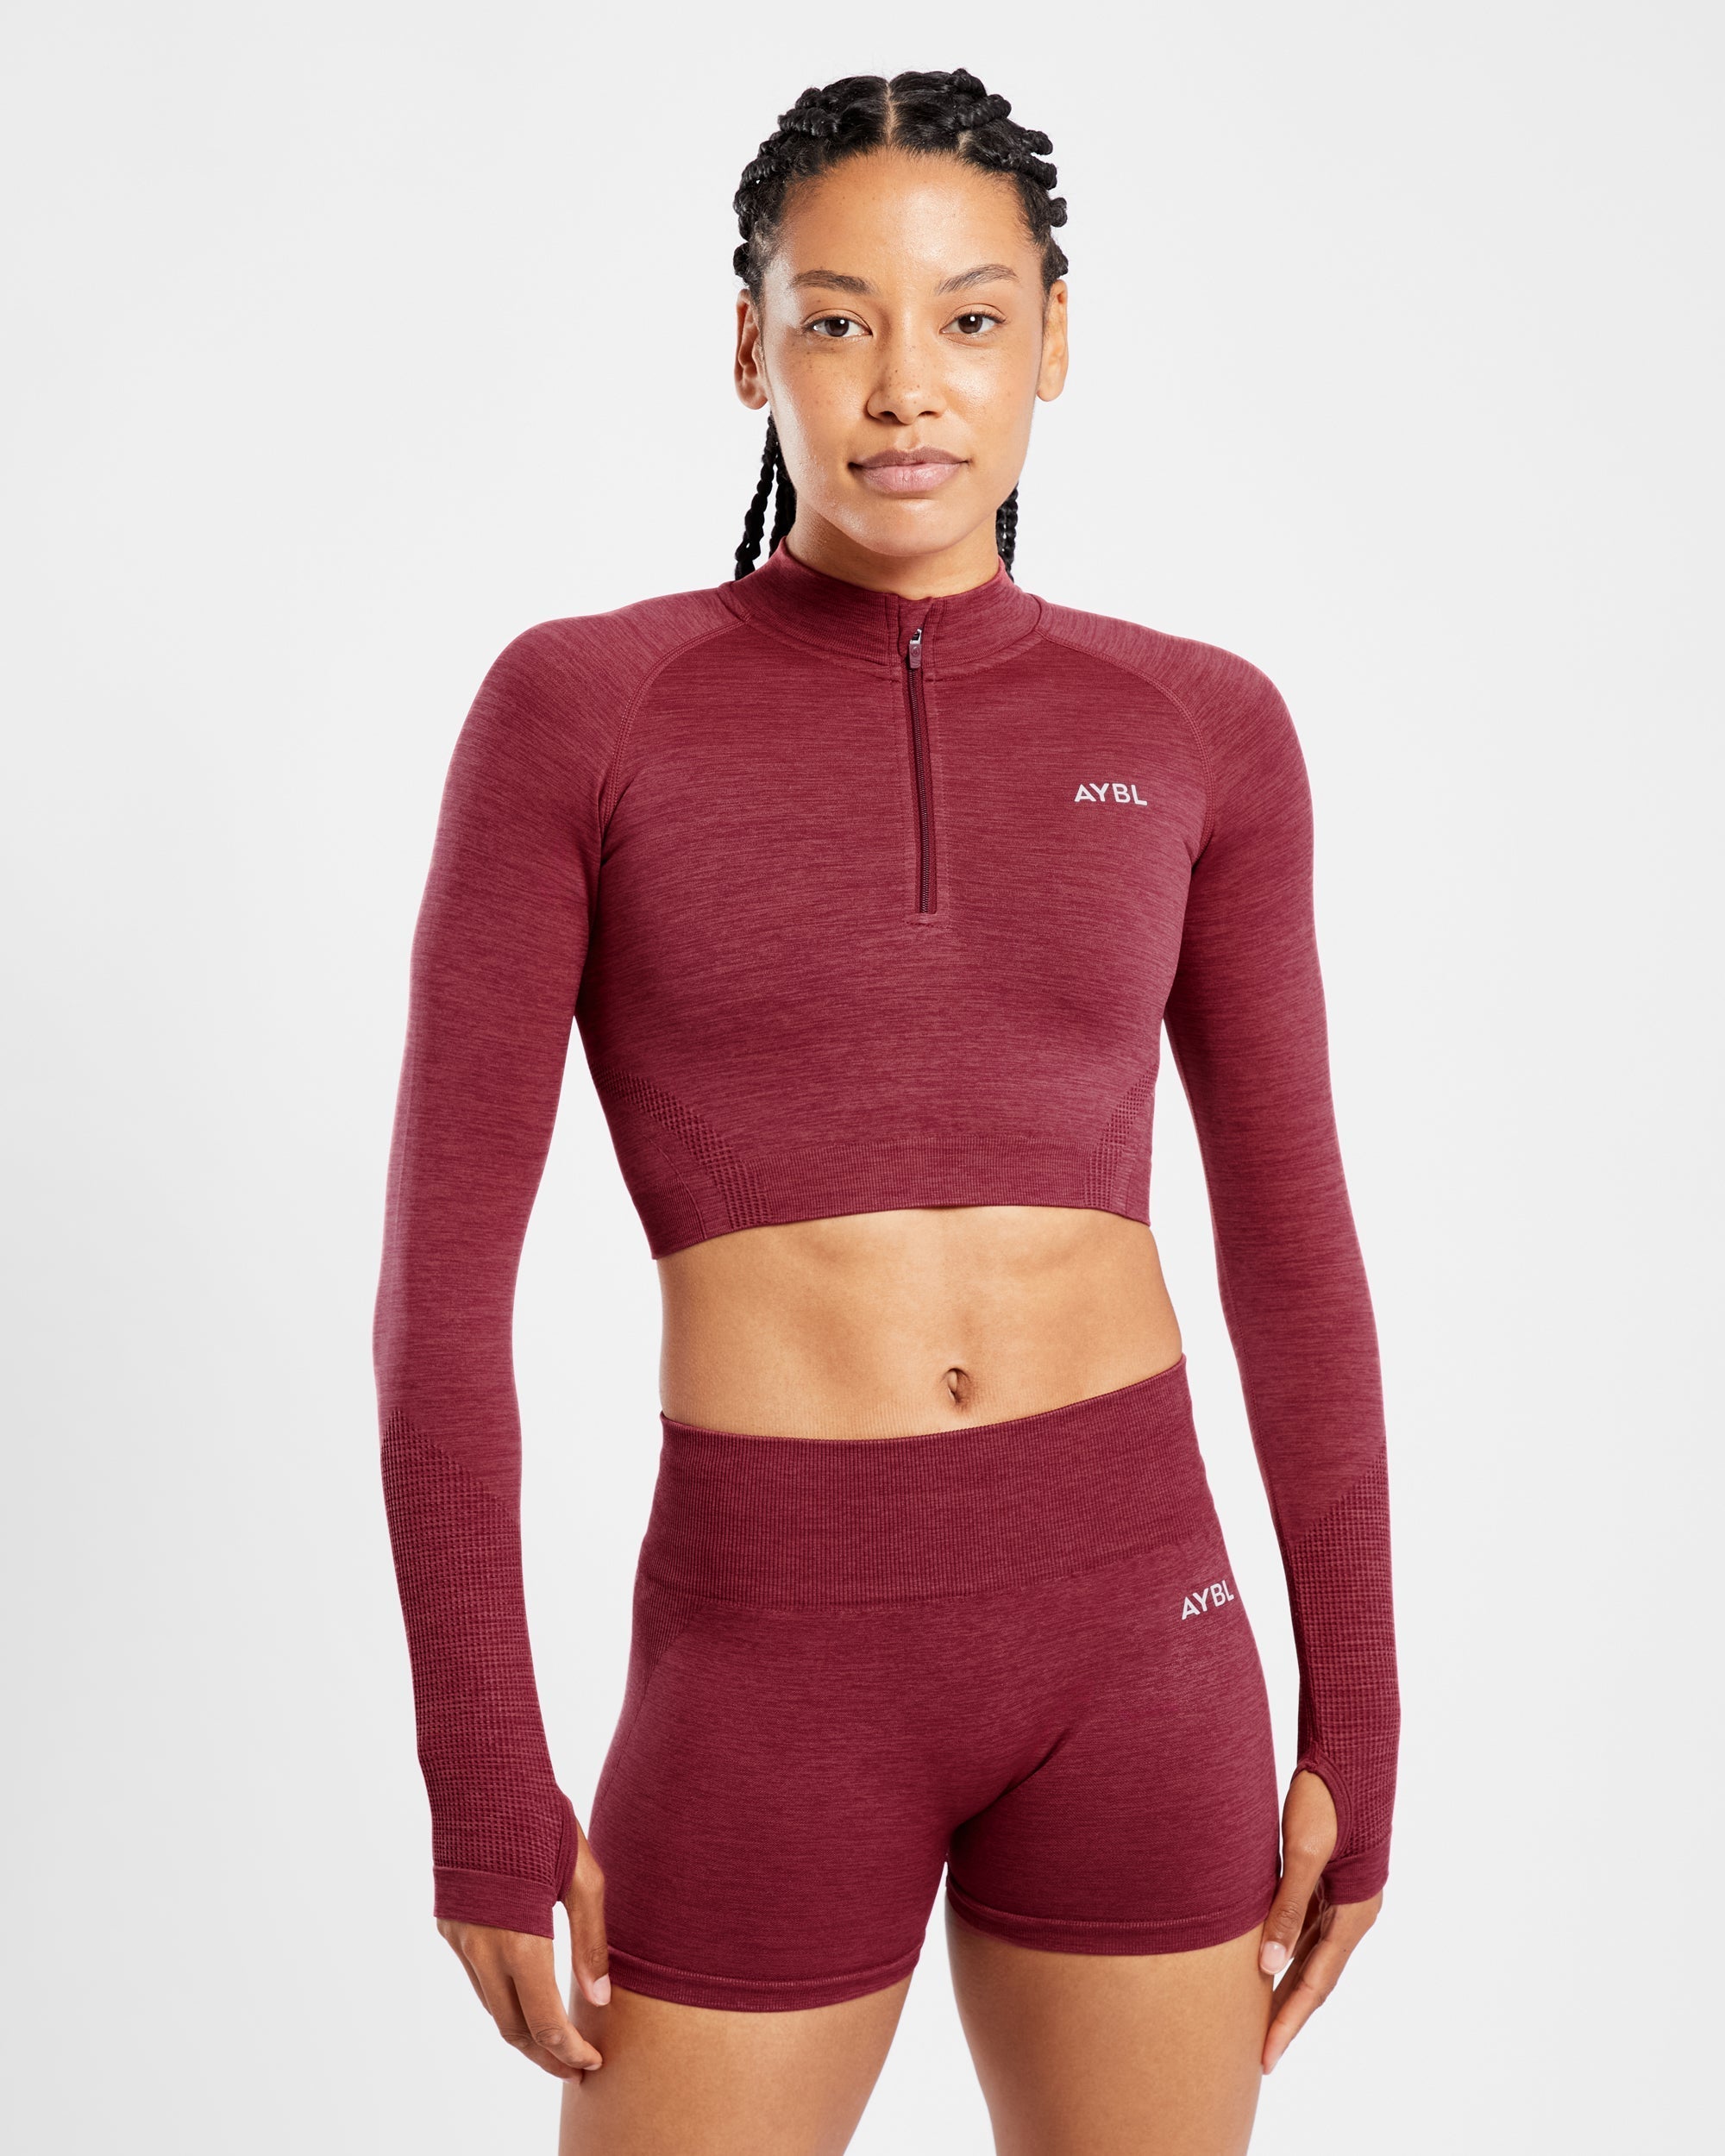 Aybl Revive Seamless Crop 1/2 Zip Pullover Review - Gymfluencers